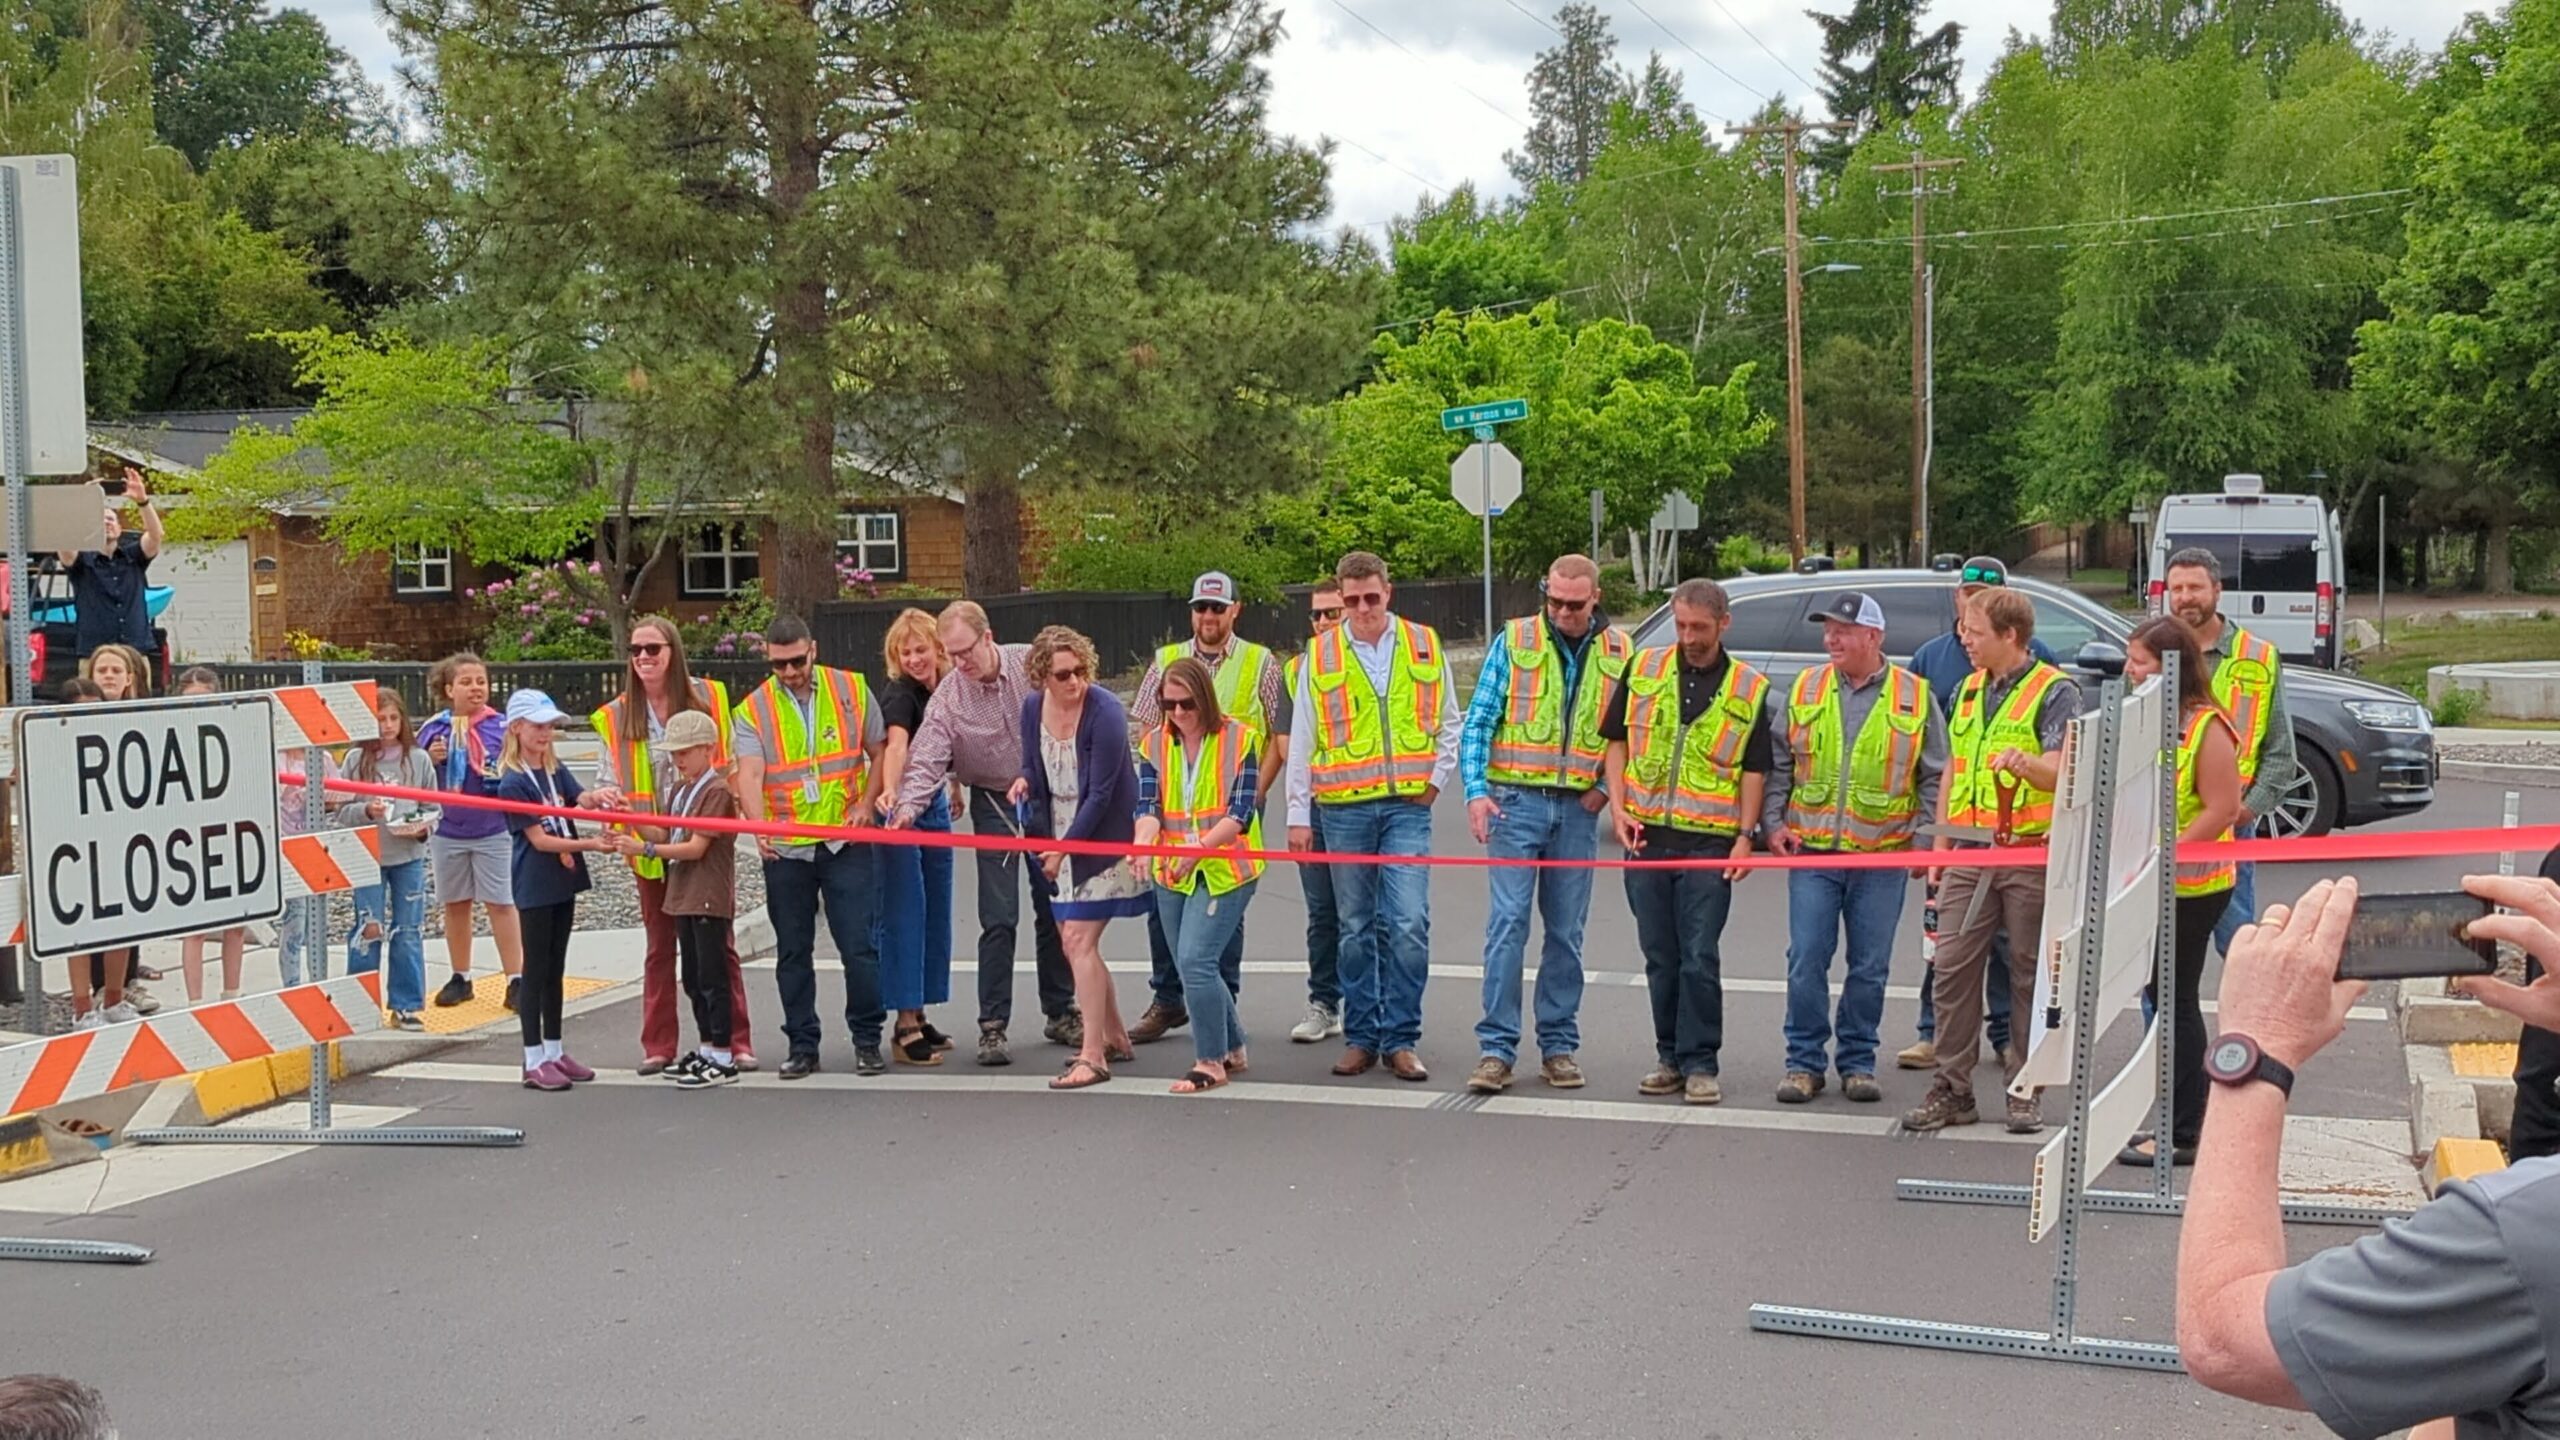 A group of people wearing safety vests stand behind a ribbon. A person in the middle cuts the ribbon.